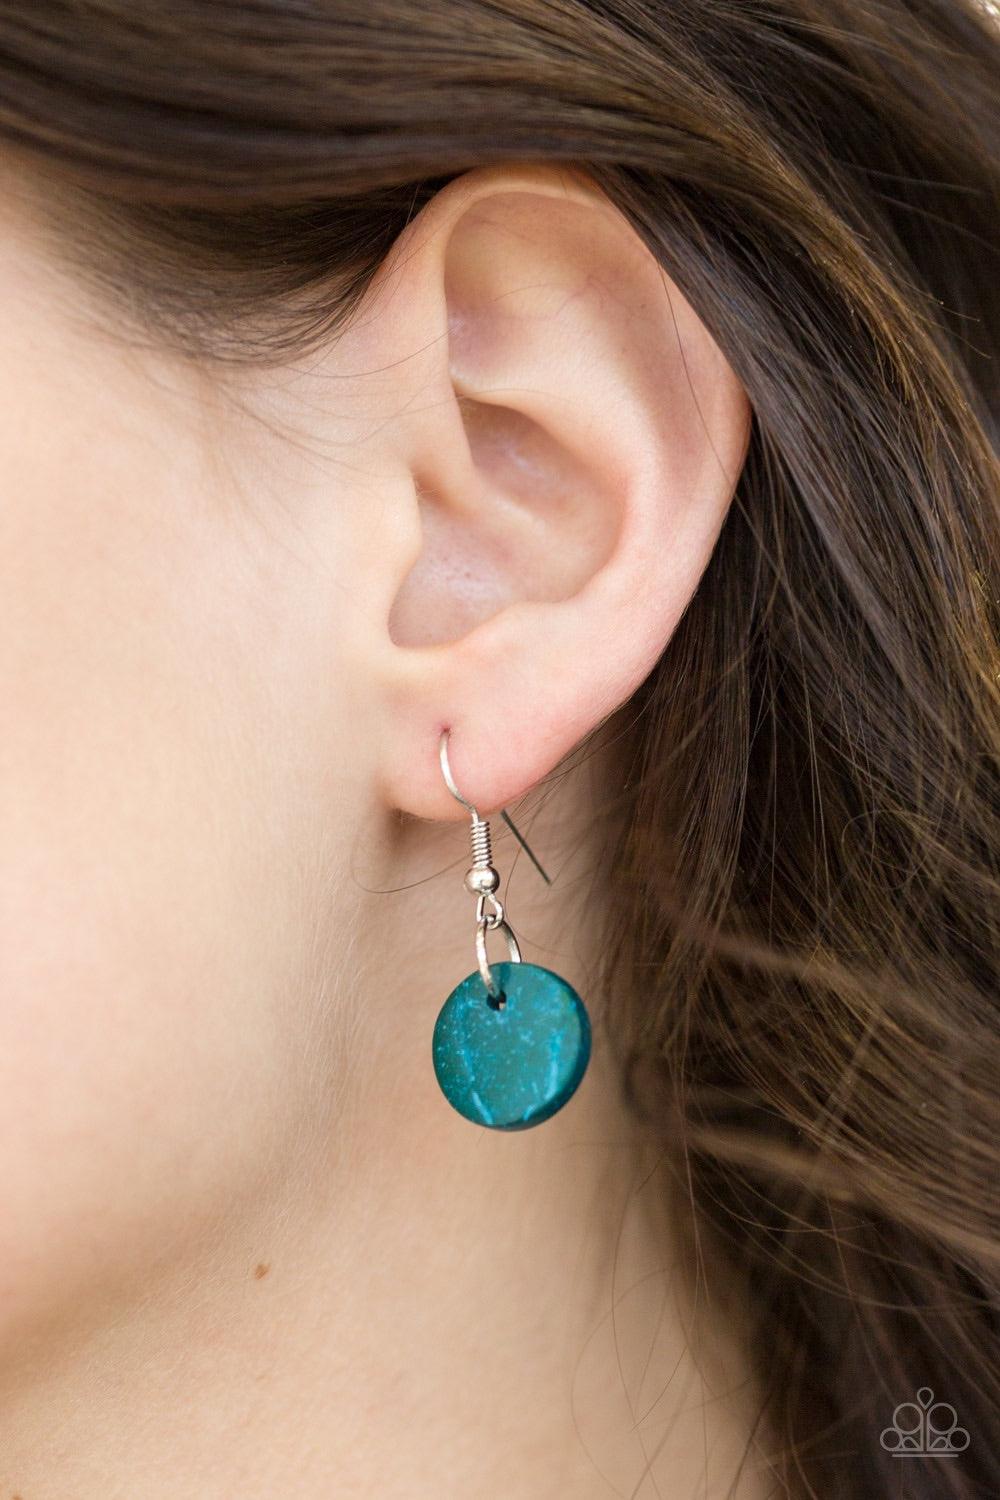 Paparazzi Accessories Hoppin Honolulu - Blue Tinted in a refreshing blue finish, distressed wooden discs trickle along strands of knotted brown cording, creating colorful layers below the collar for a seasonal vibe. Features a button-loop closure. Jewelry